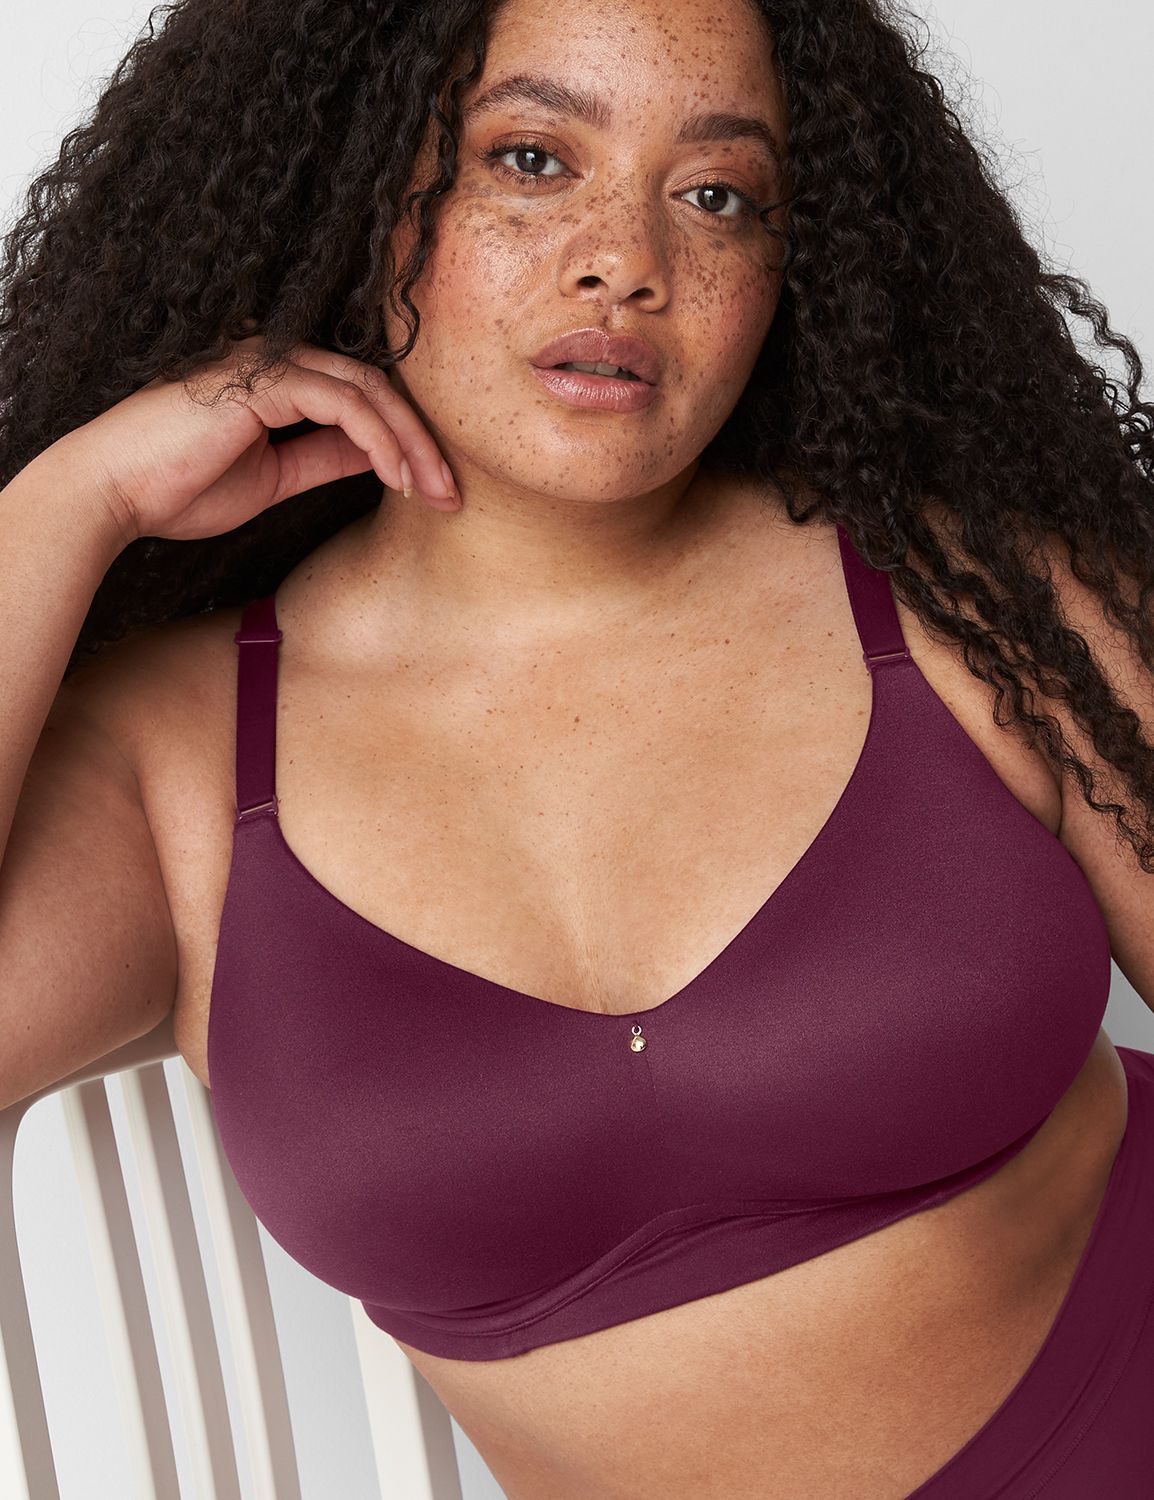 Invisible Lace Backsmoother Lightly Lined Balconette Bra